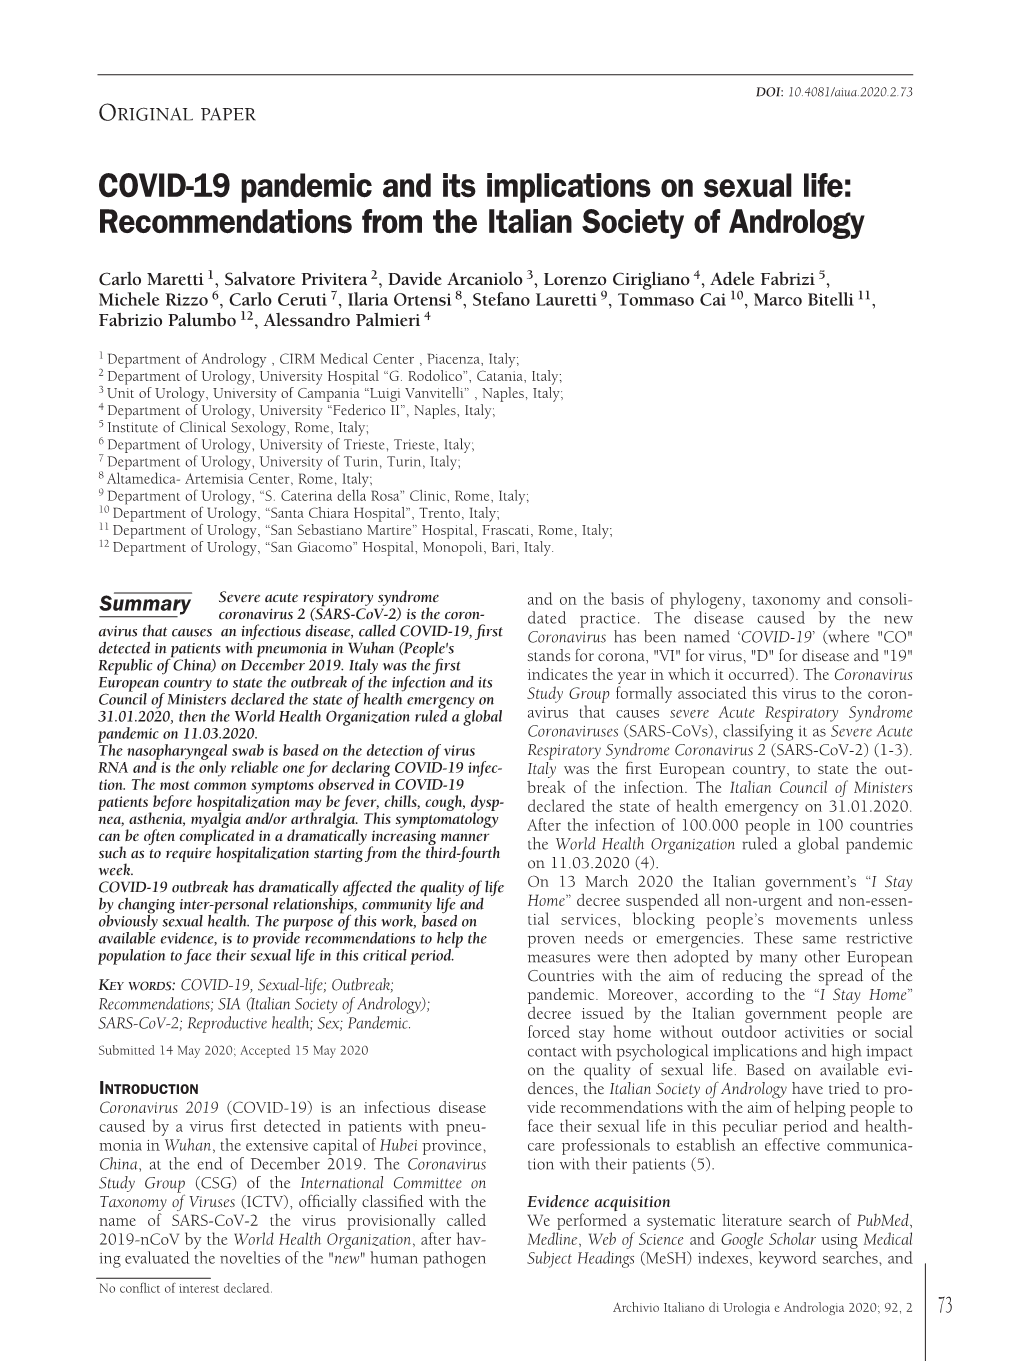 COVID-19 Pandemic and Its Implications on Sexual Life: Recommendations from the Italian Society of Andrology